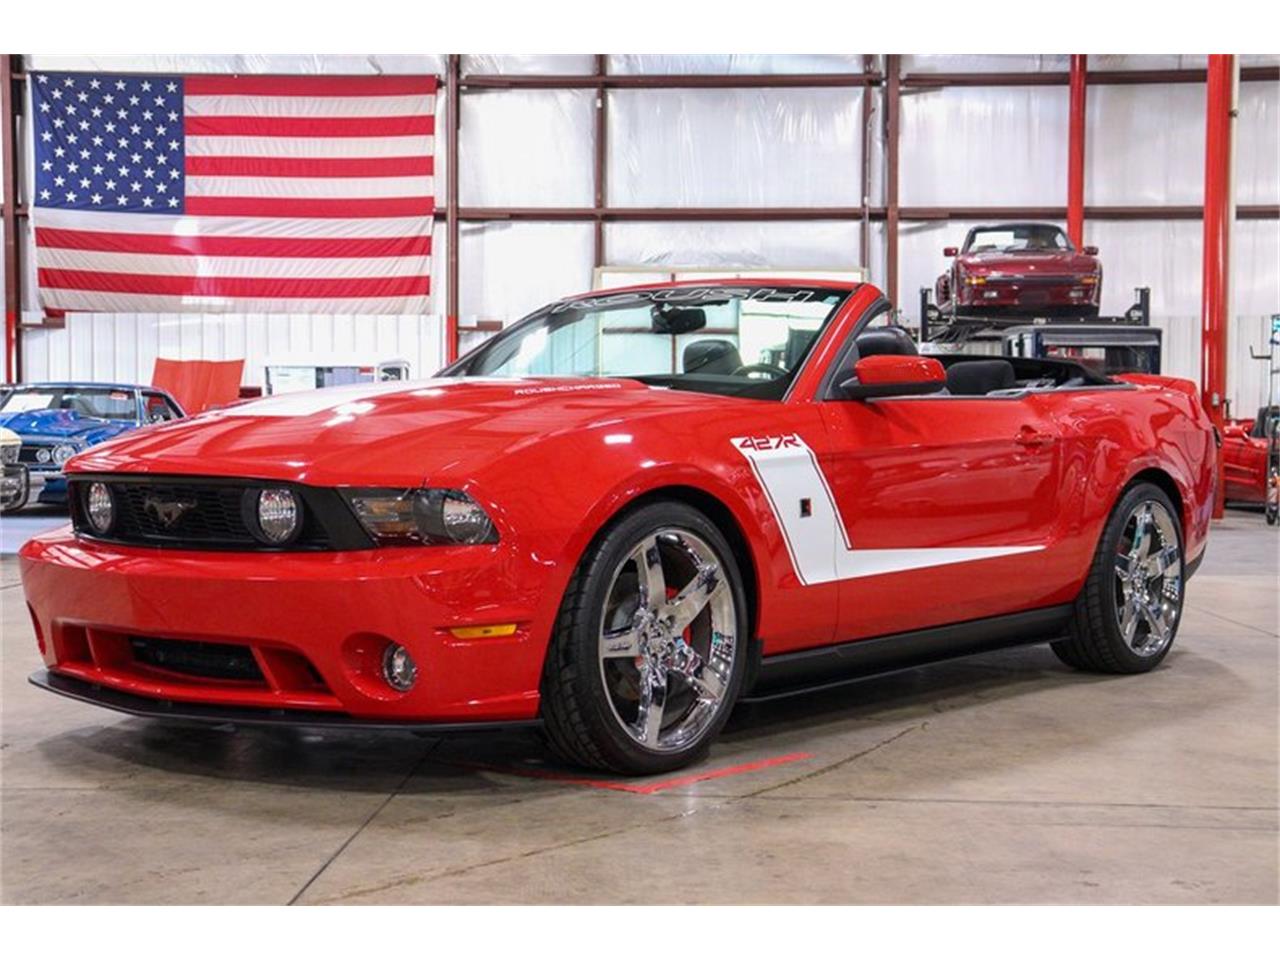 For Sale: 2010 Ford Mustang in Ken2od, Michigan for sale in Grand Rapids, MI